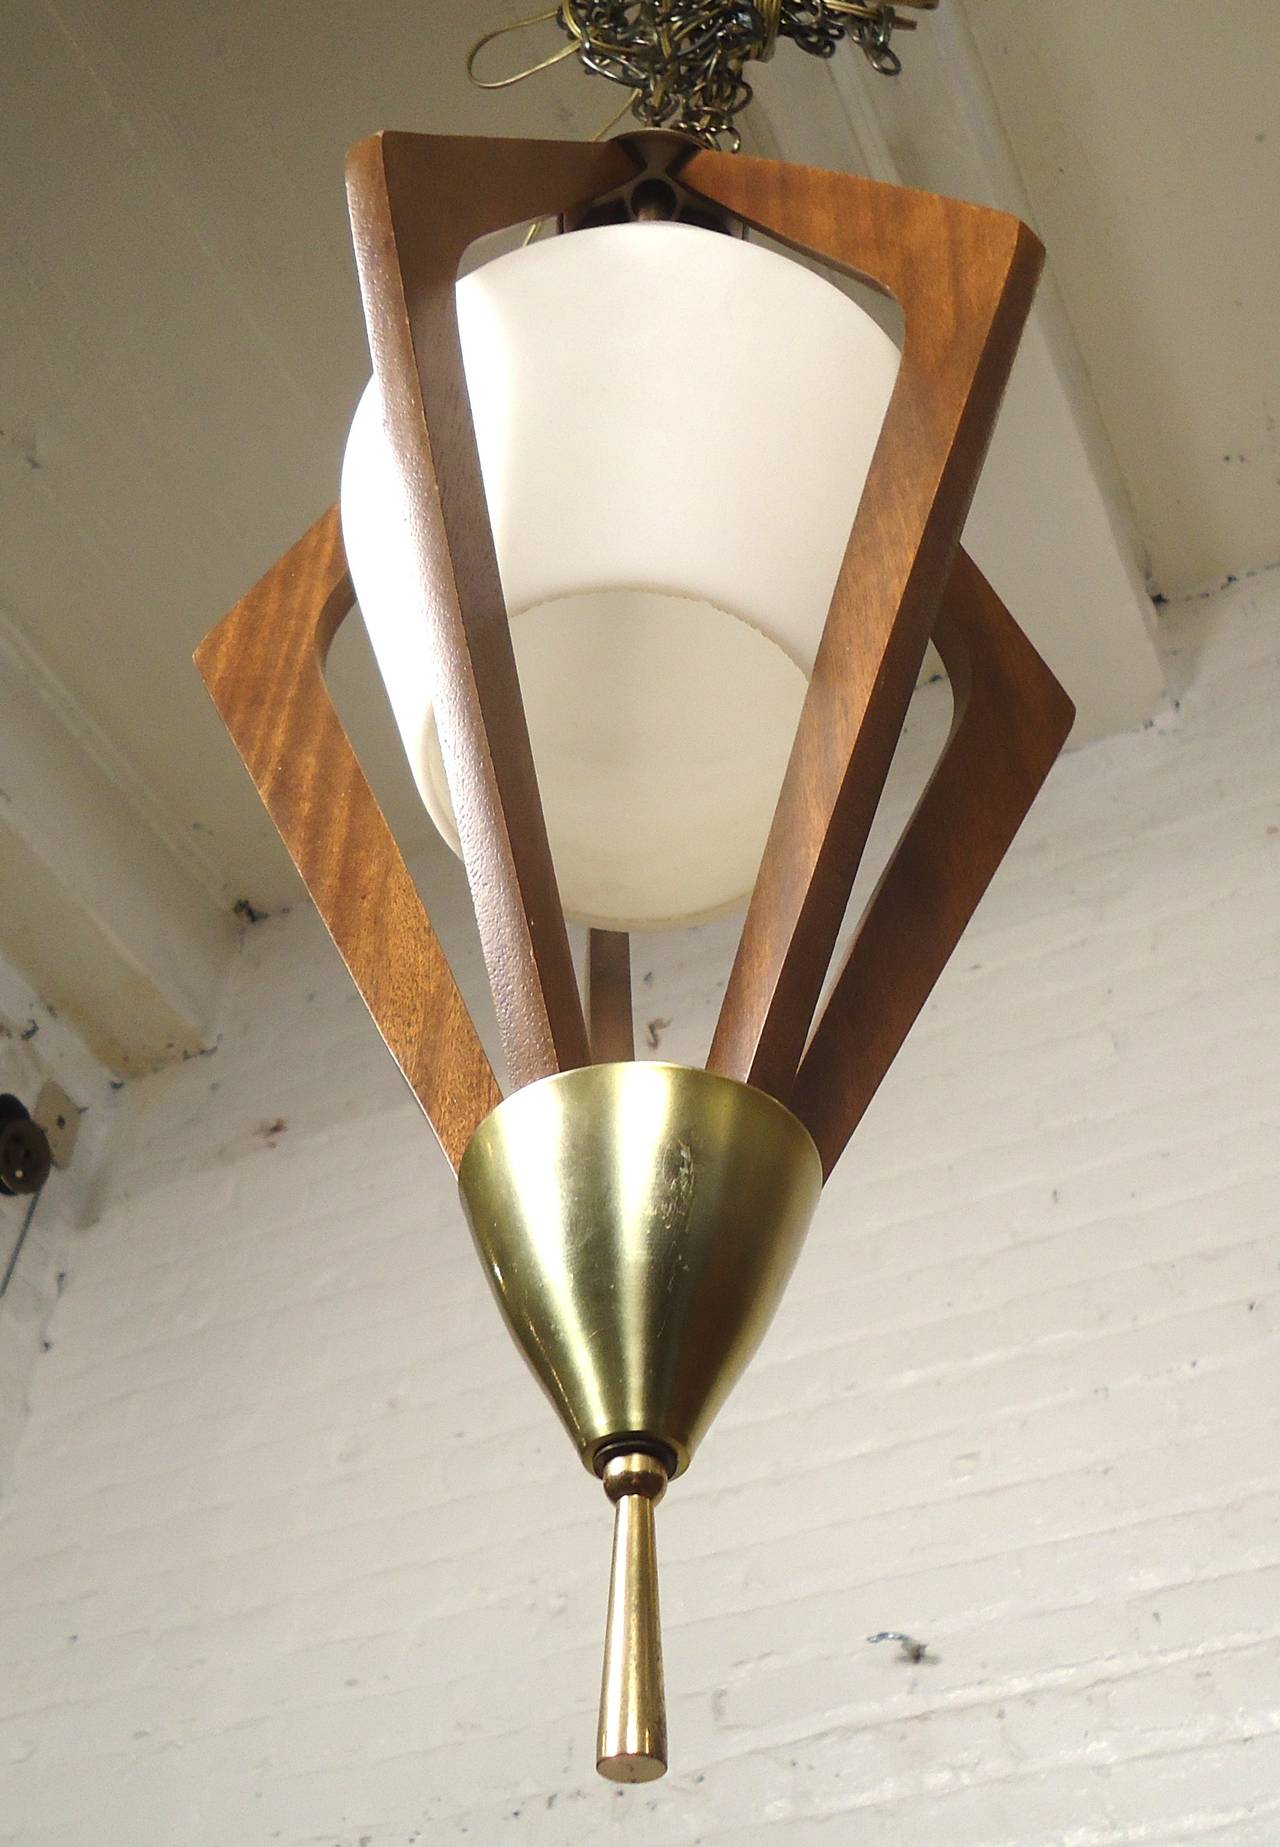 Angular vintage modern hanging pendant with milk glass shade and sharply sculpted walnut frame. Accented with brass trimming.

(Please confirm item location - NY or NJ - with dealer)